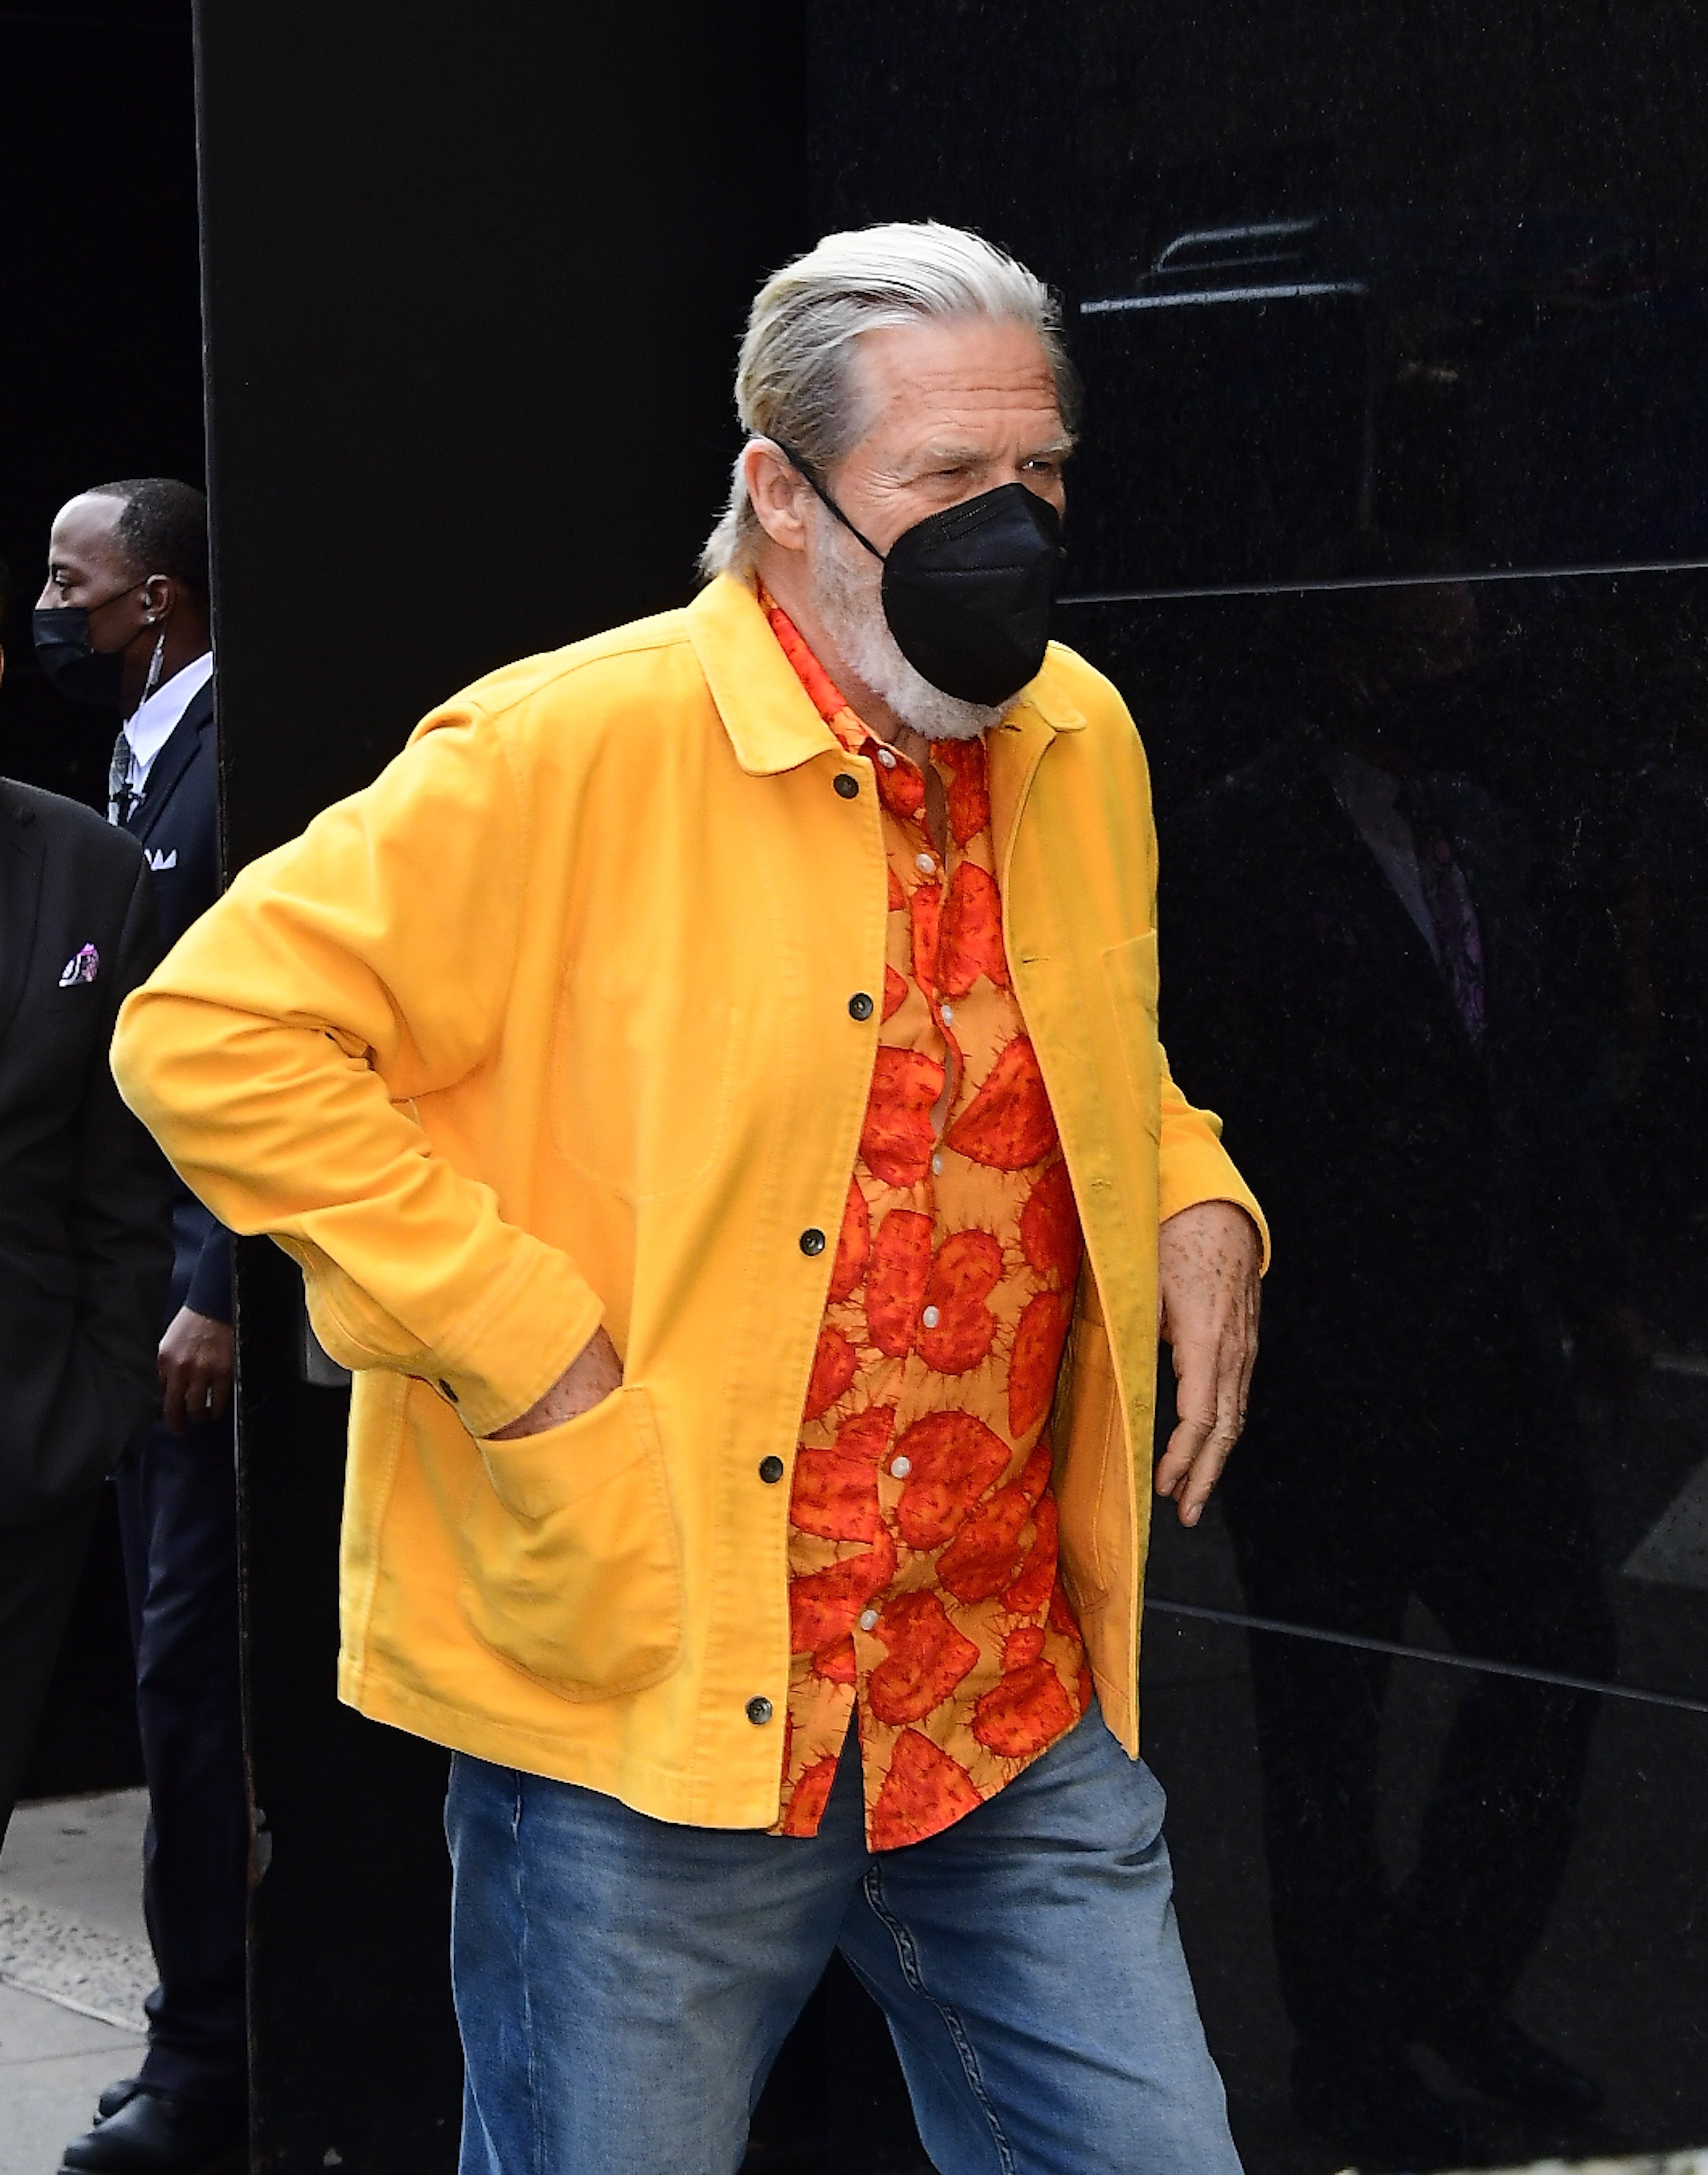 Actor Jeff Bridges is seen outside "Good Morning America" on June 13, 2022 in New York City. | Source: Getty Images